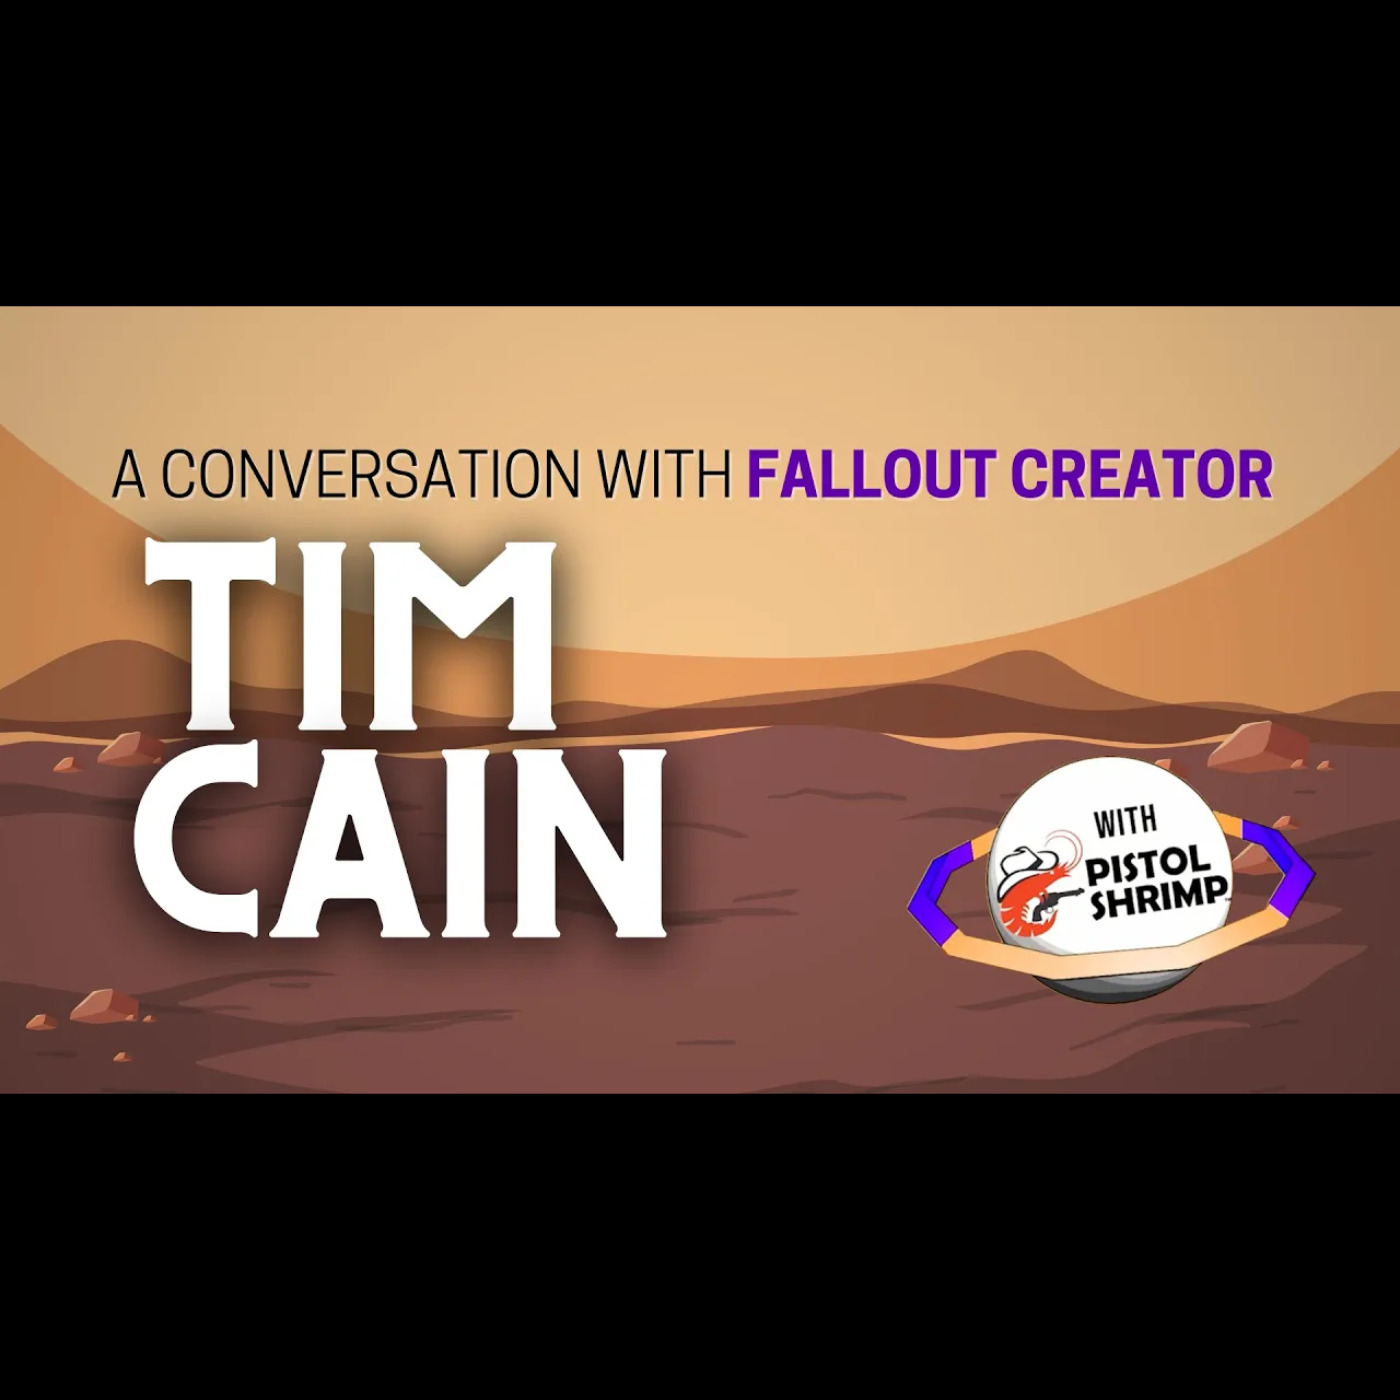 Channel 44: A Conversation with Tim Cain